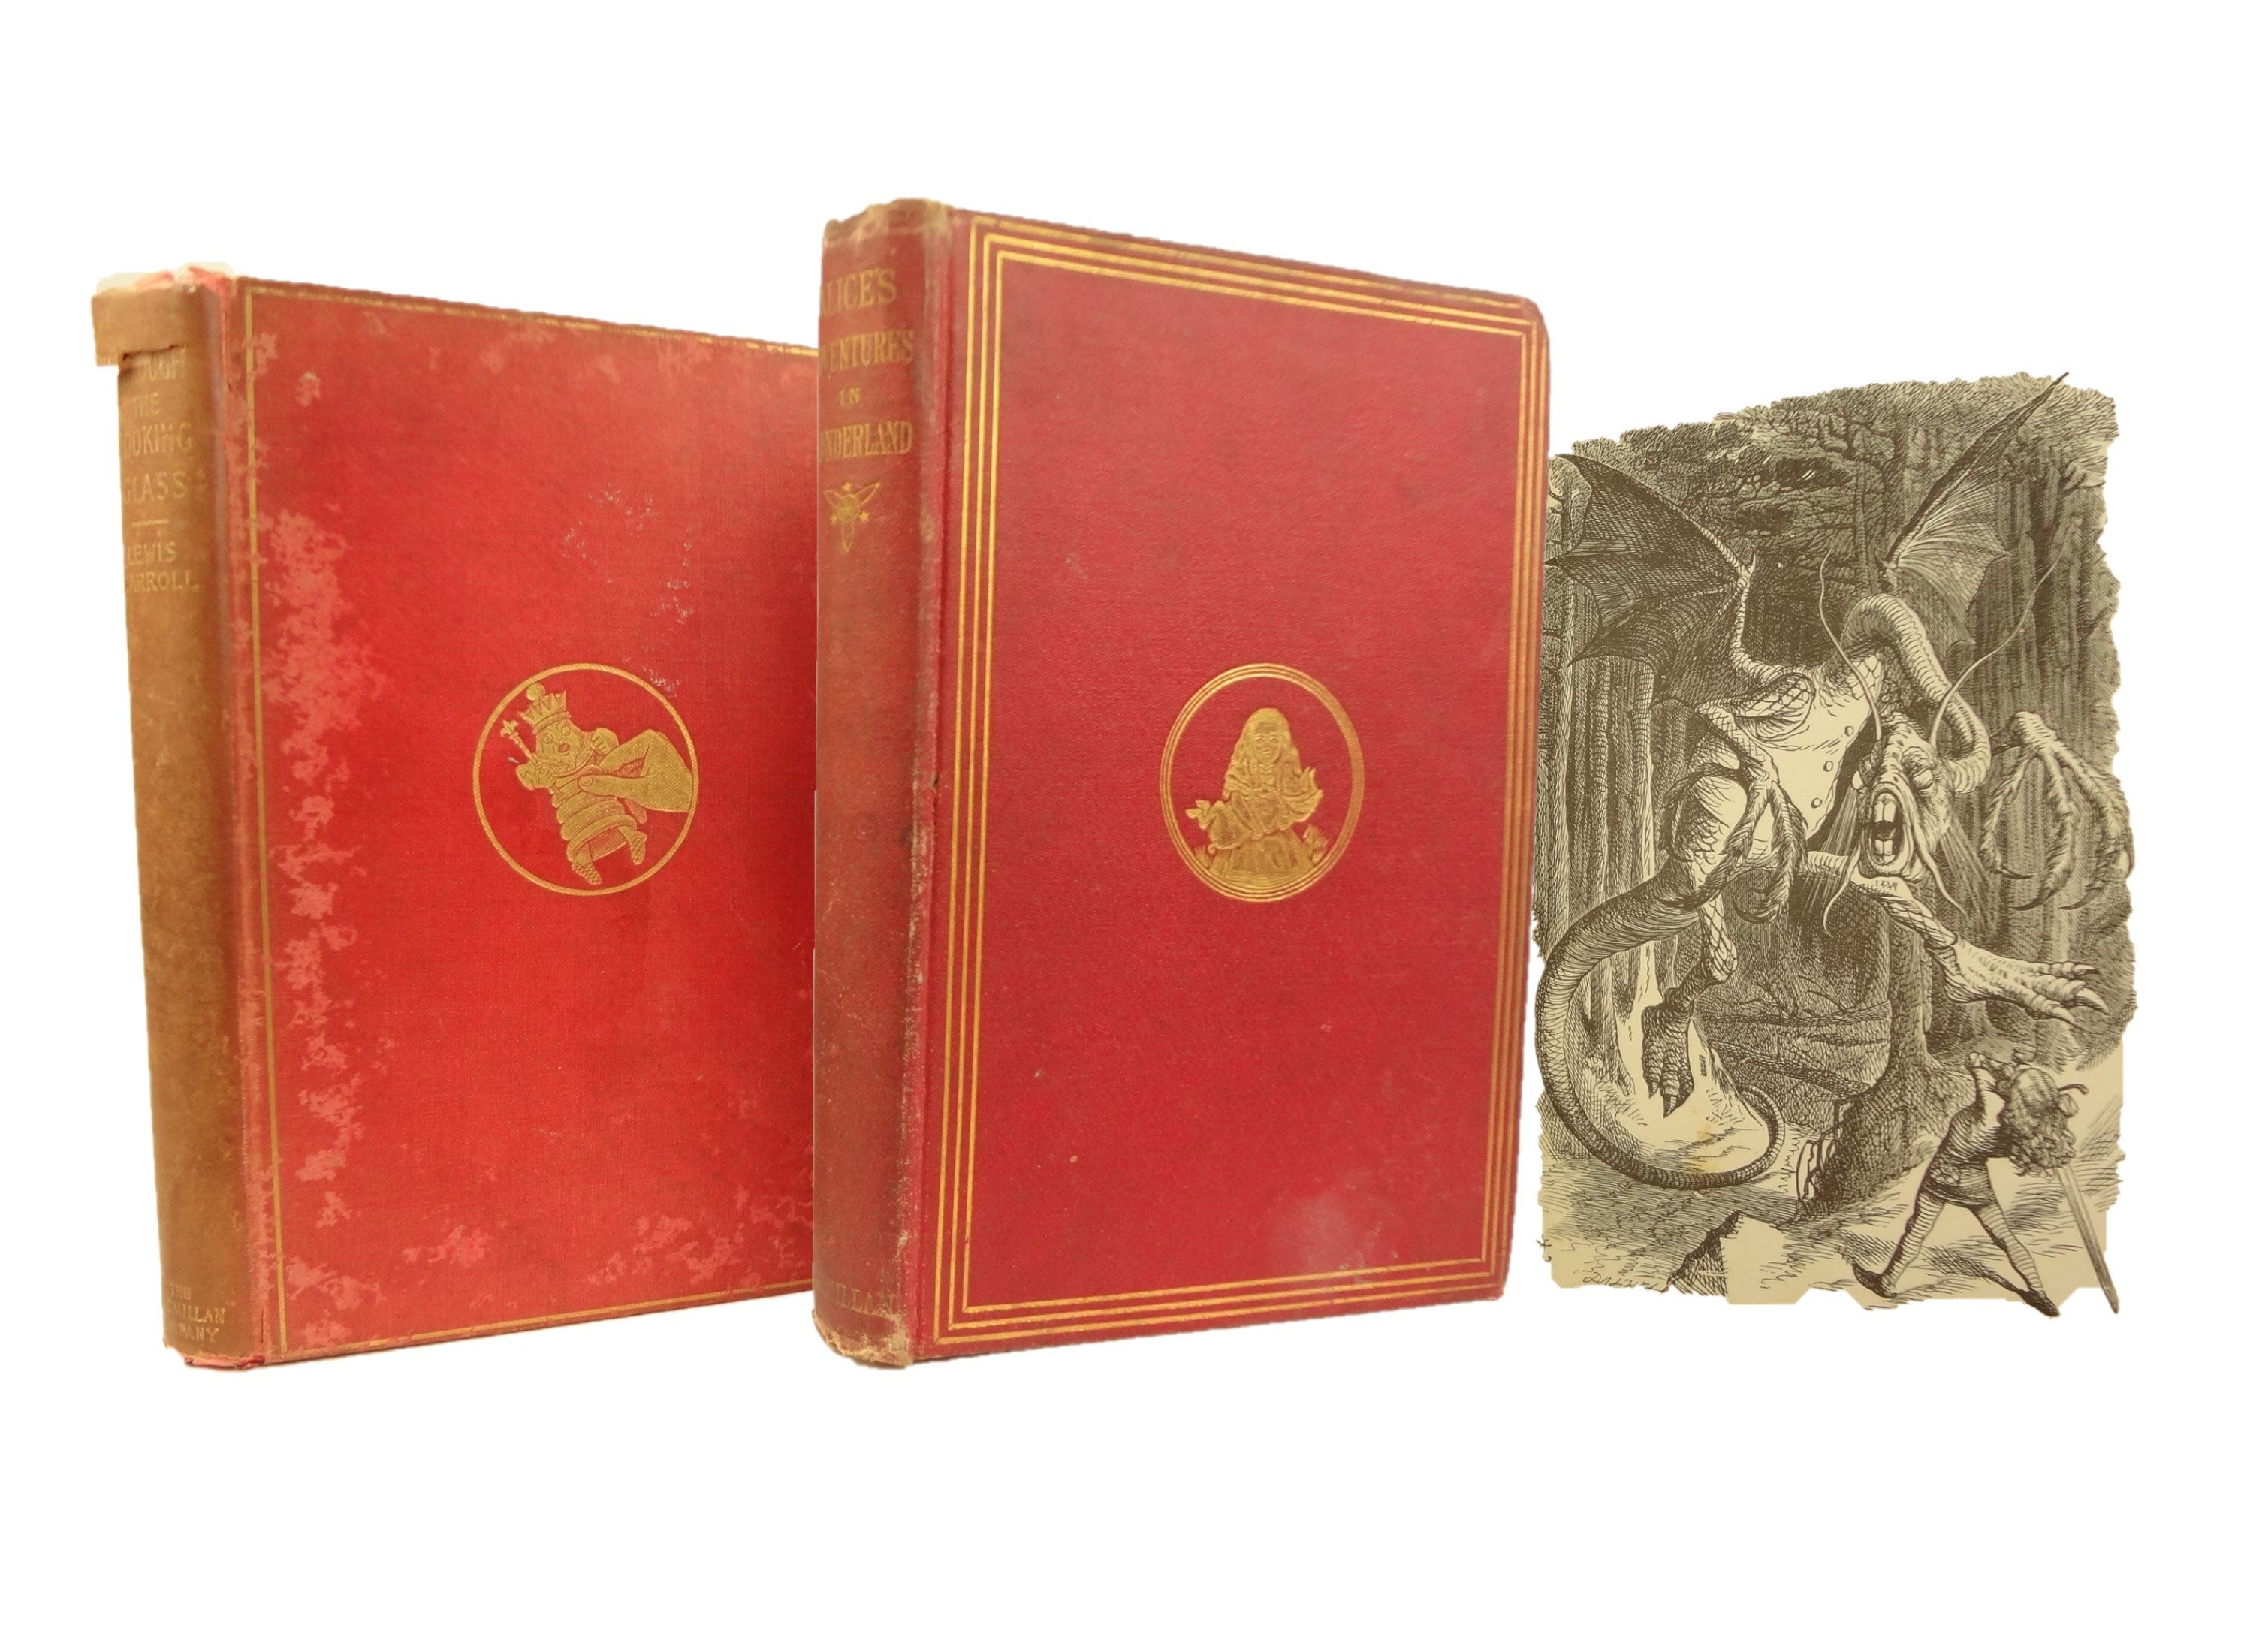 Alice's Adventures in Wonderland, Book by Lewis Carroll, John Tenniel, Official Publisher Page